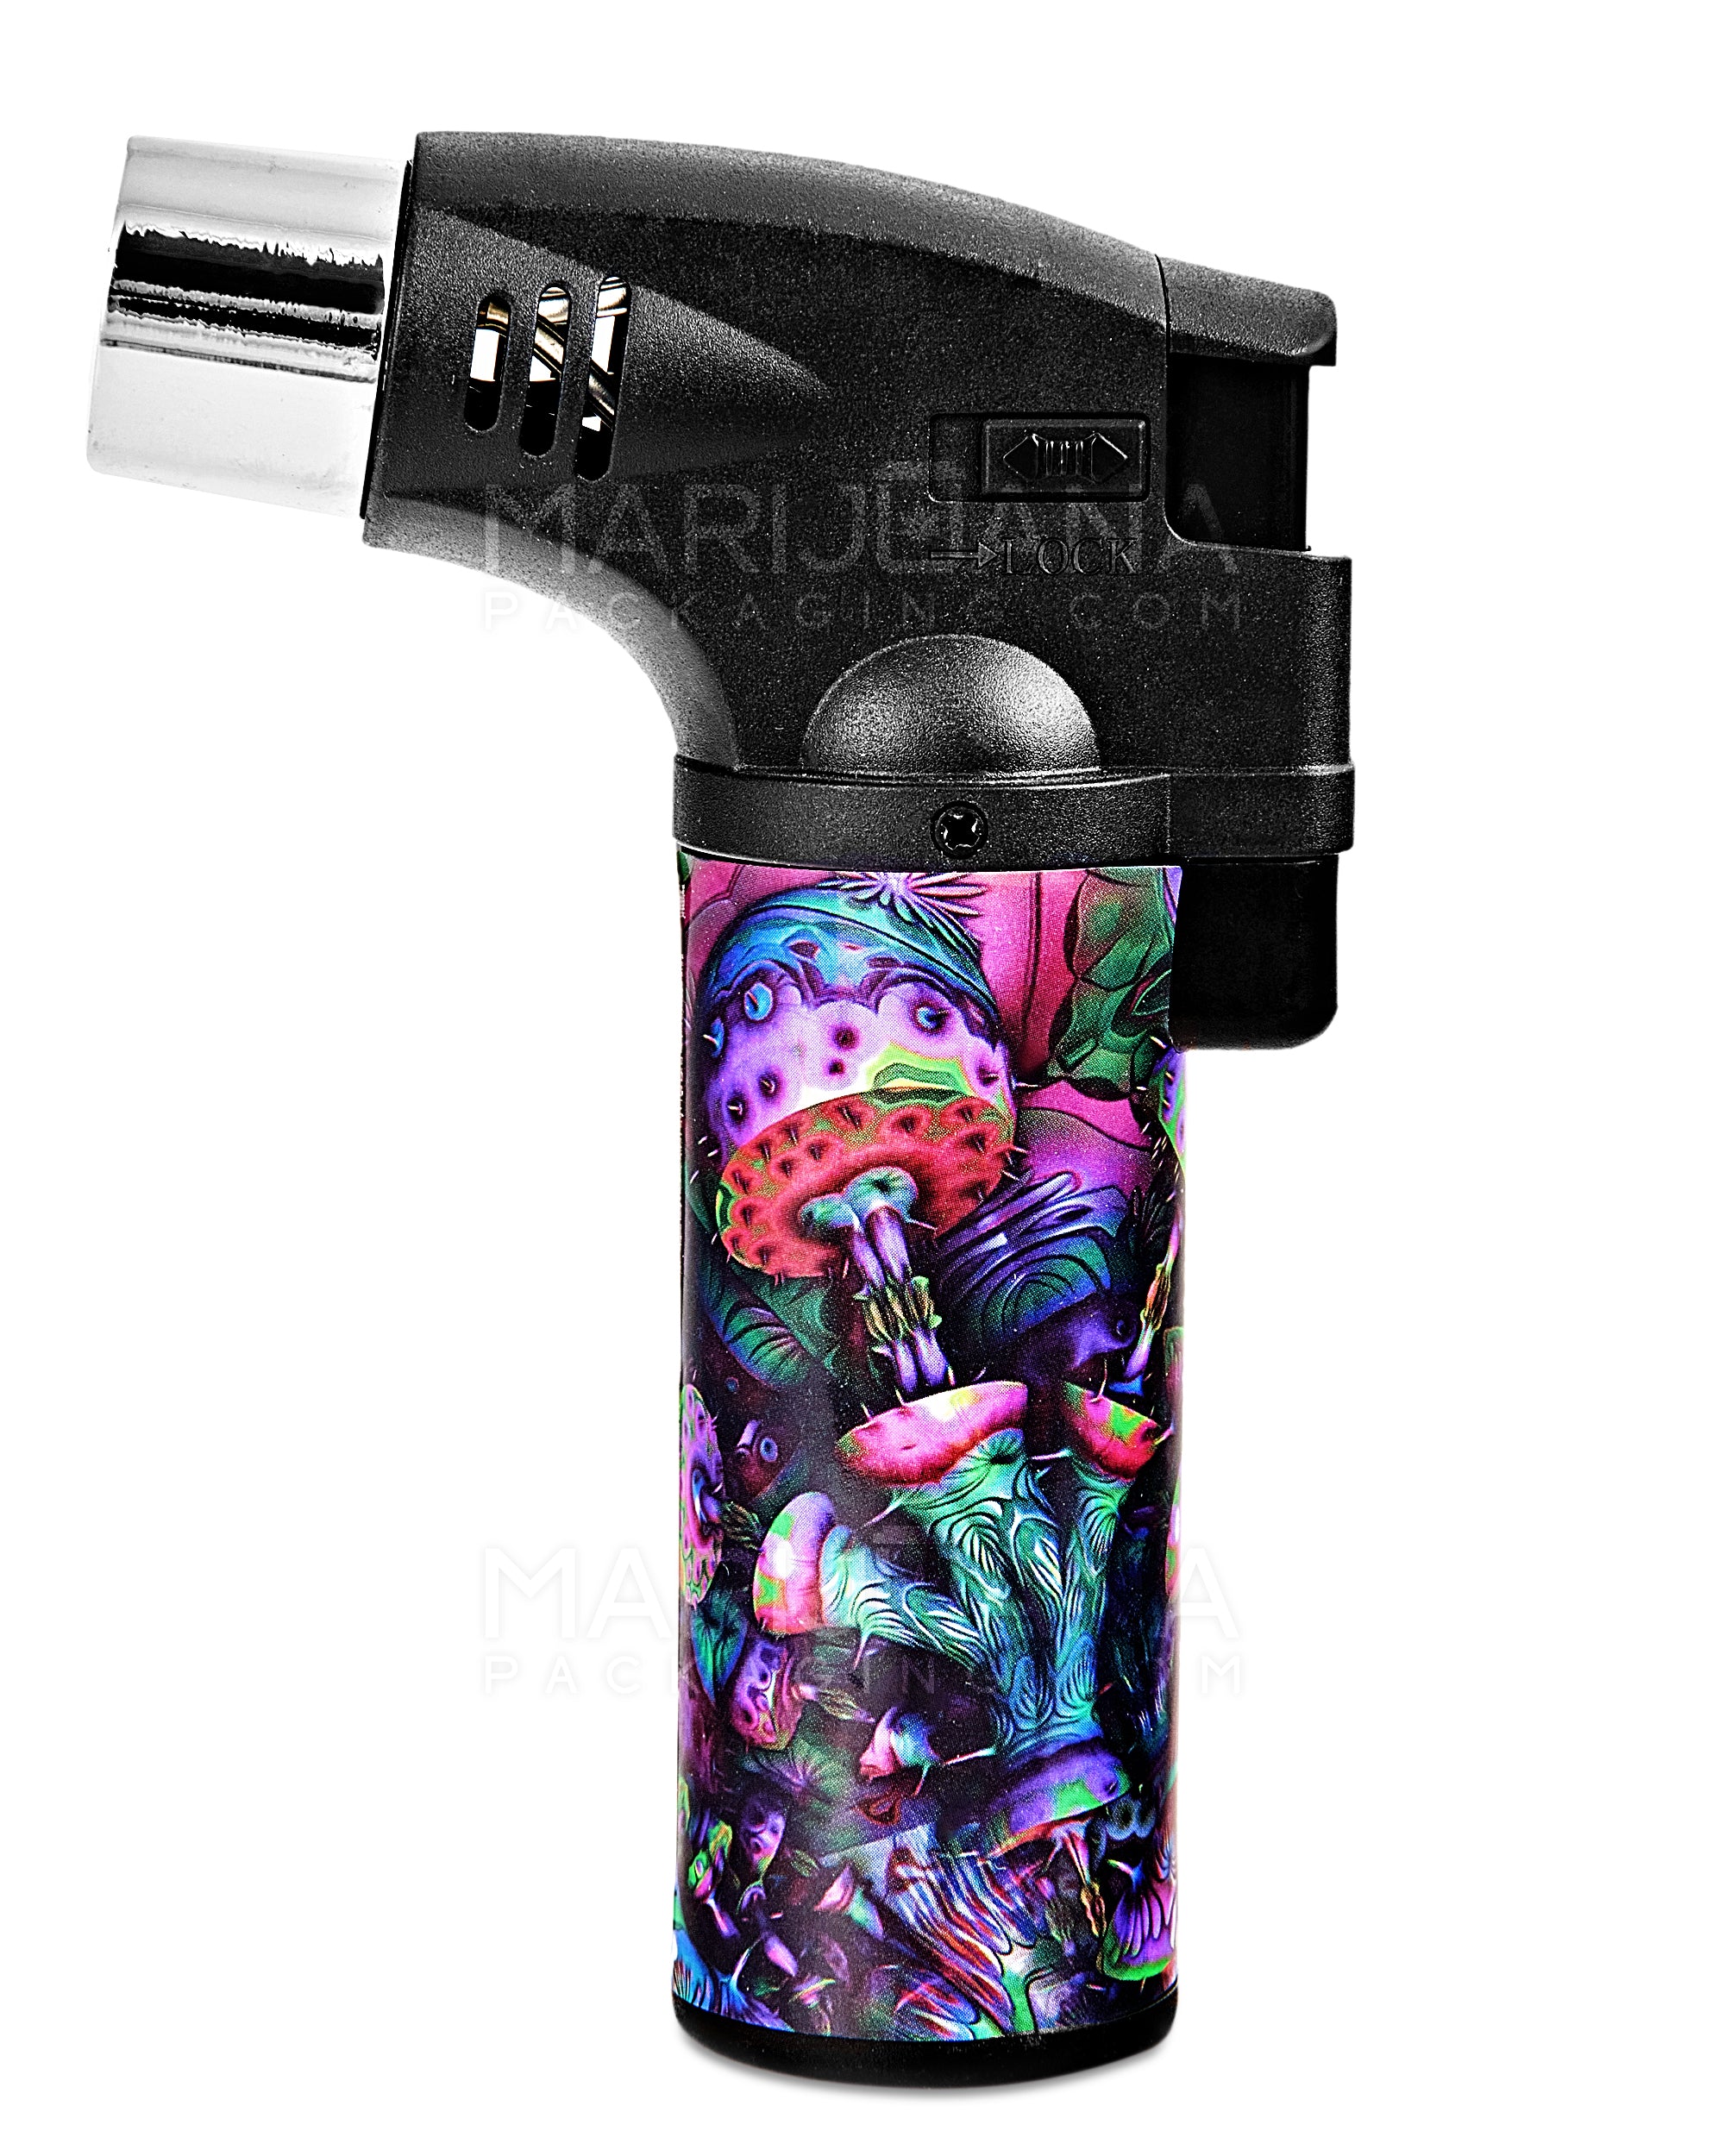 Psychedelic Design Plastic Torch w/ Safety Lock | 4.5in Tall - Butane - Assorted - 1